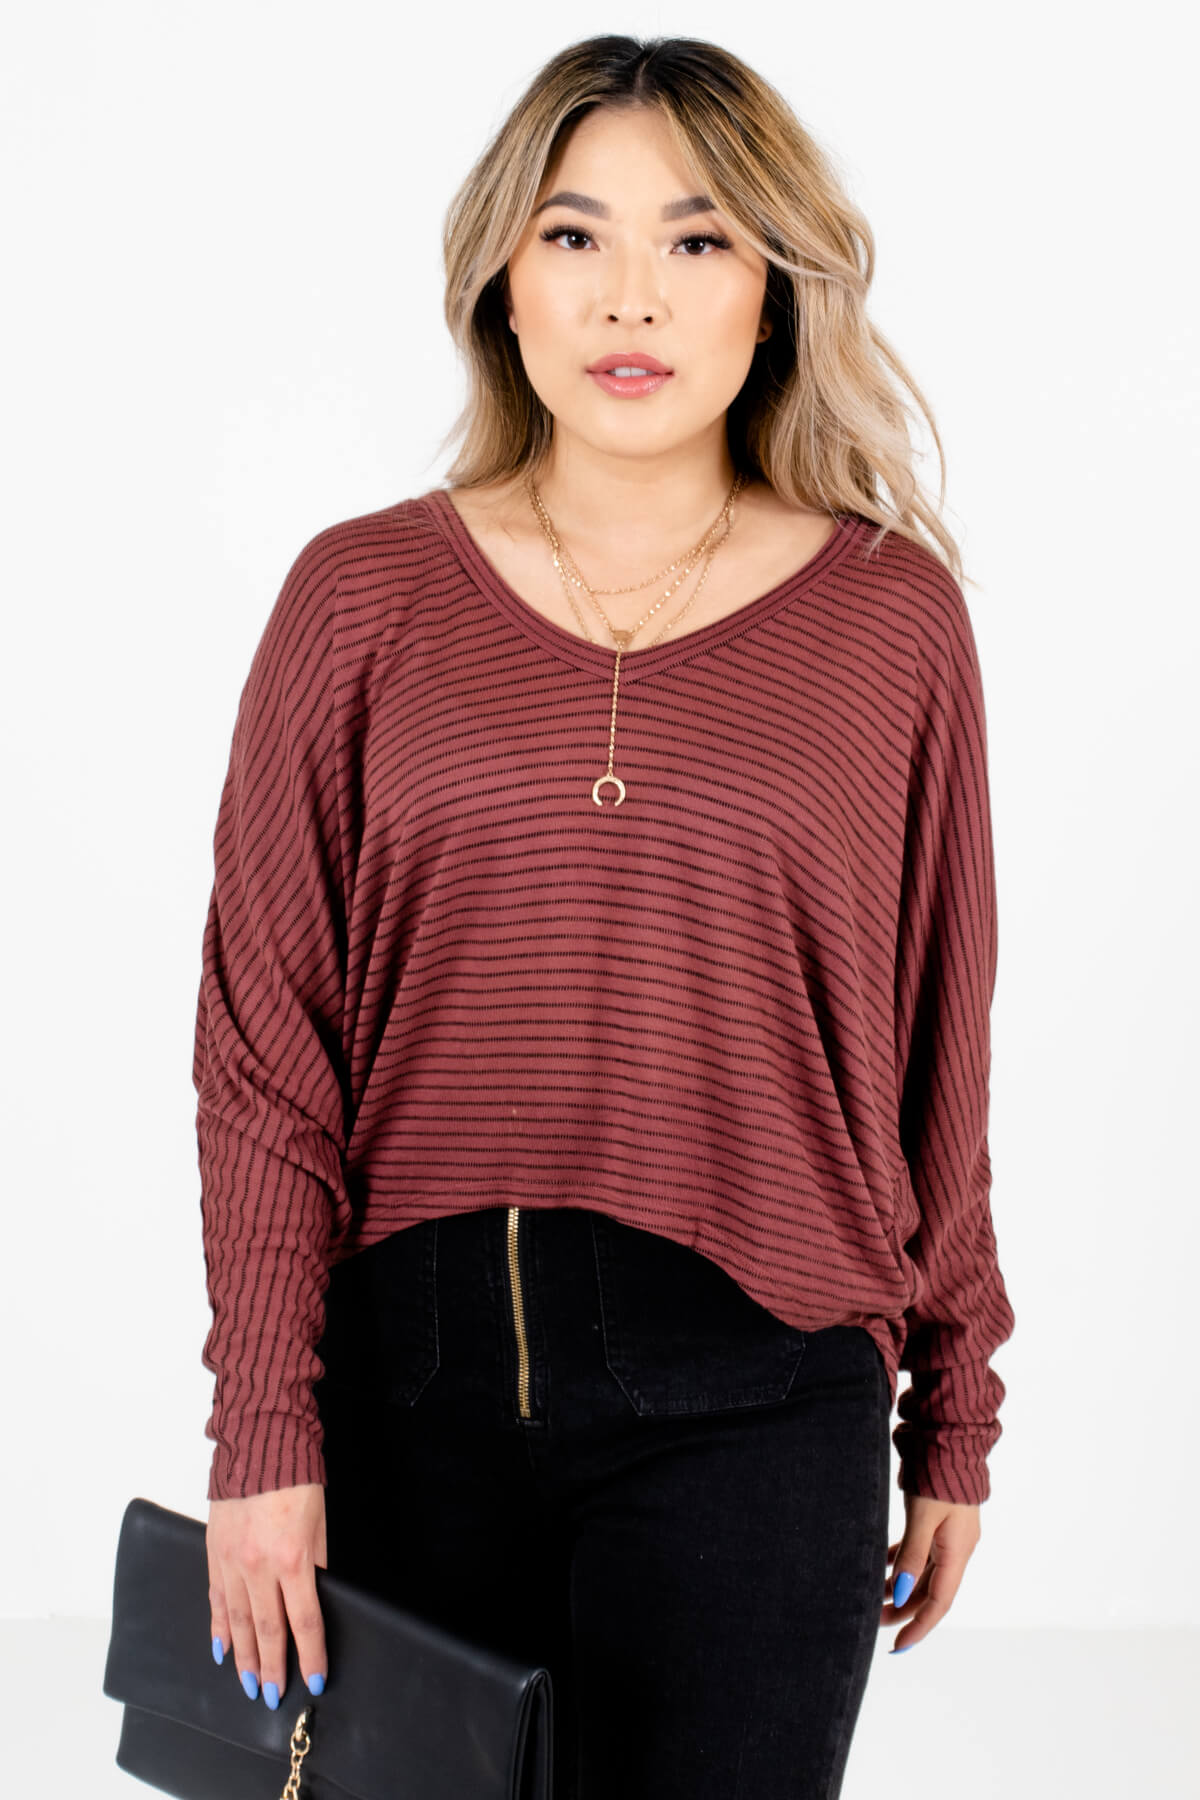 Mauve and Black Striped Boutique Tops for Women